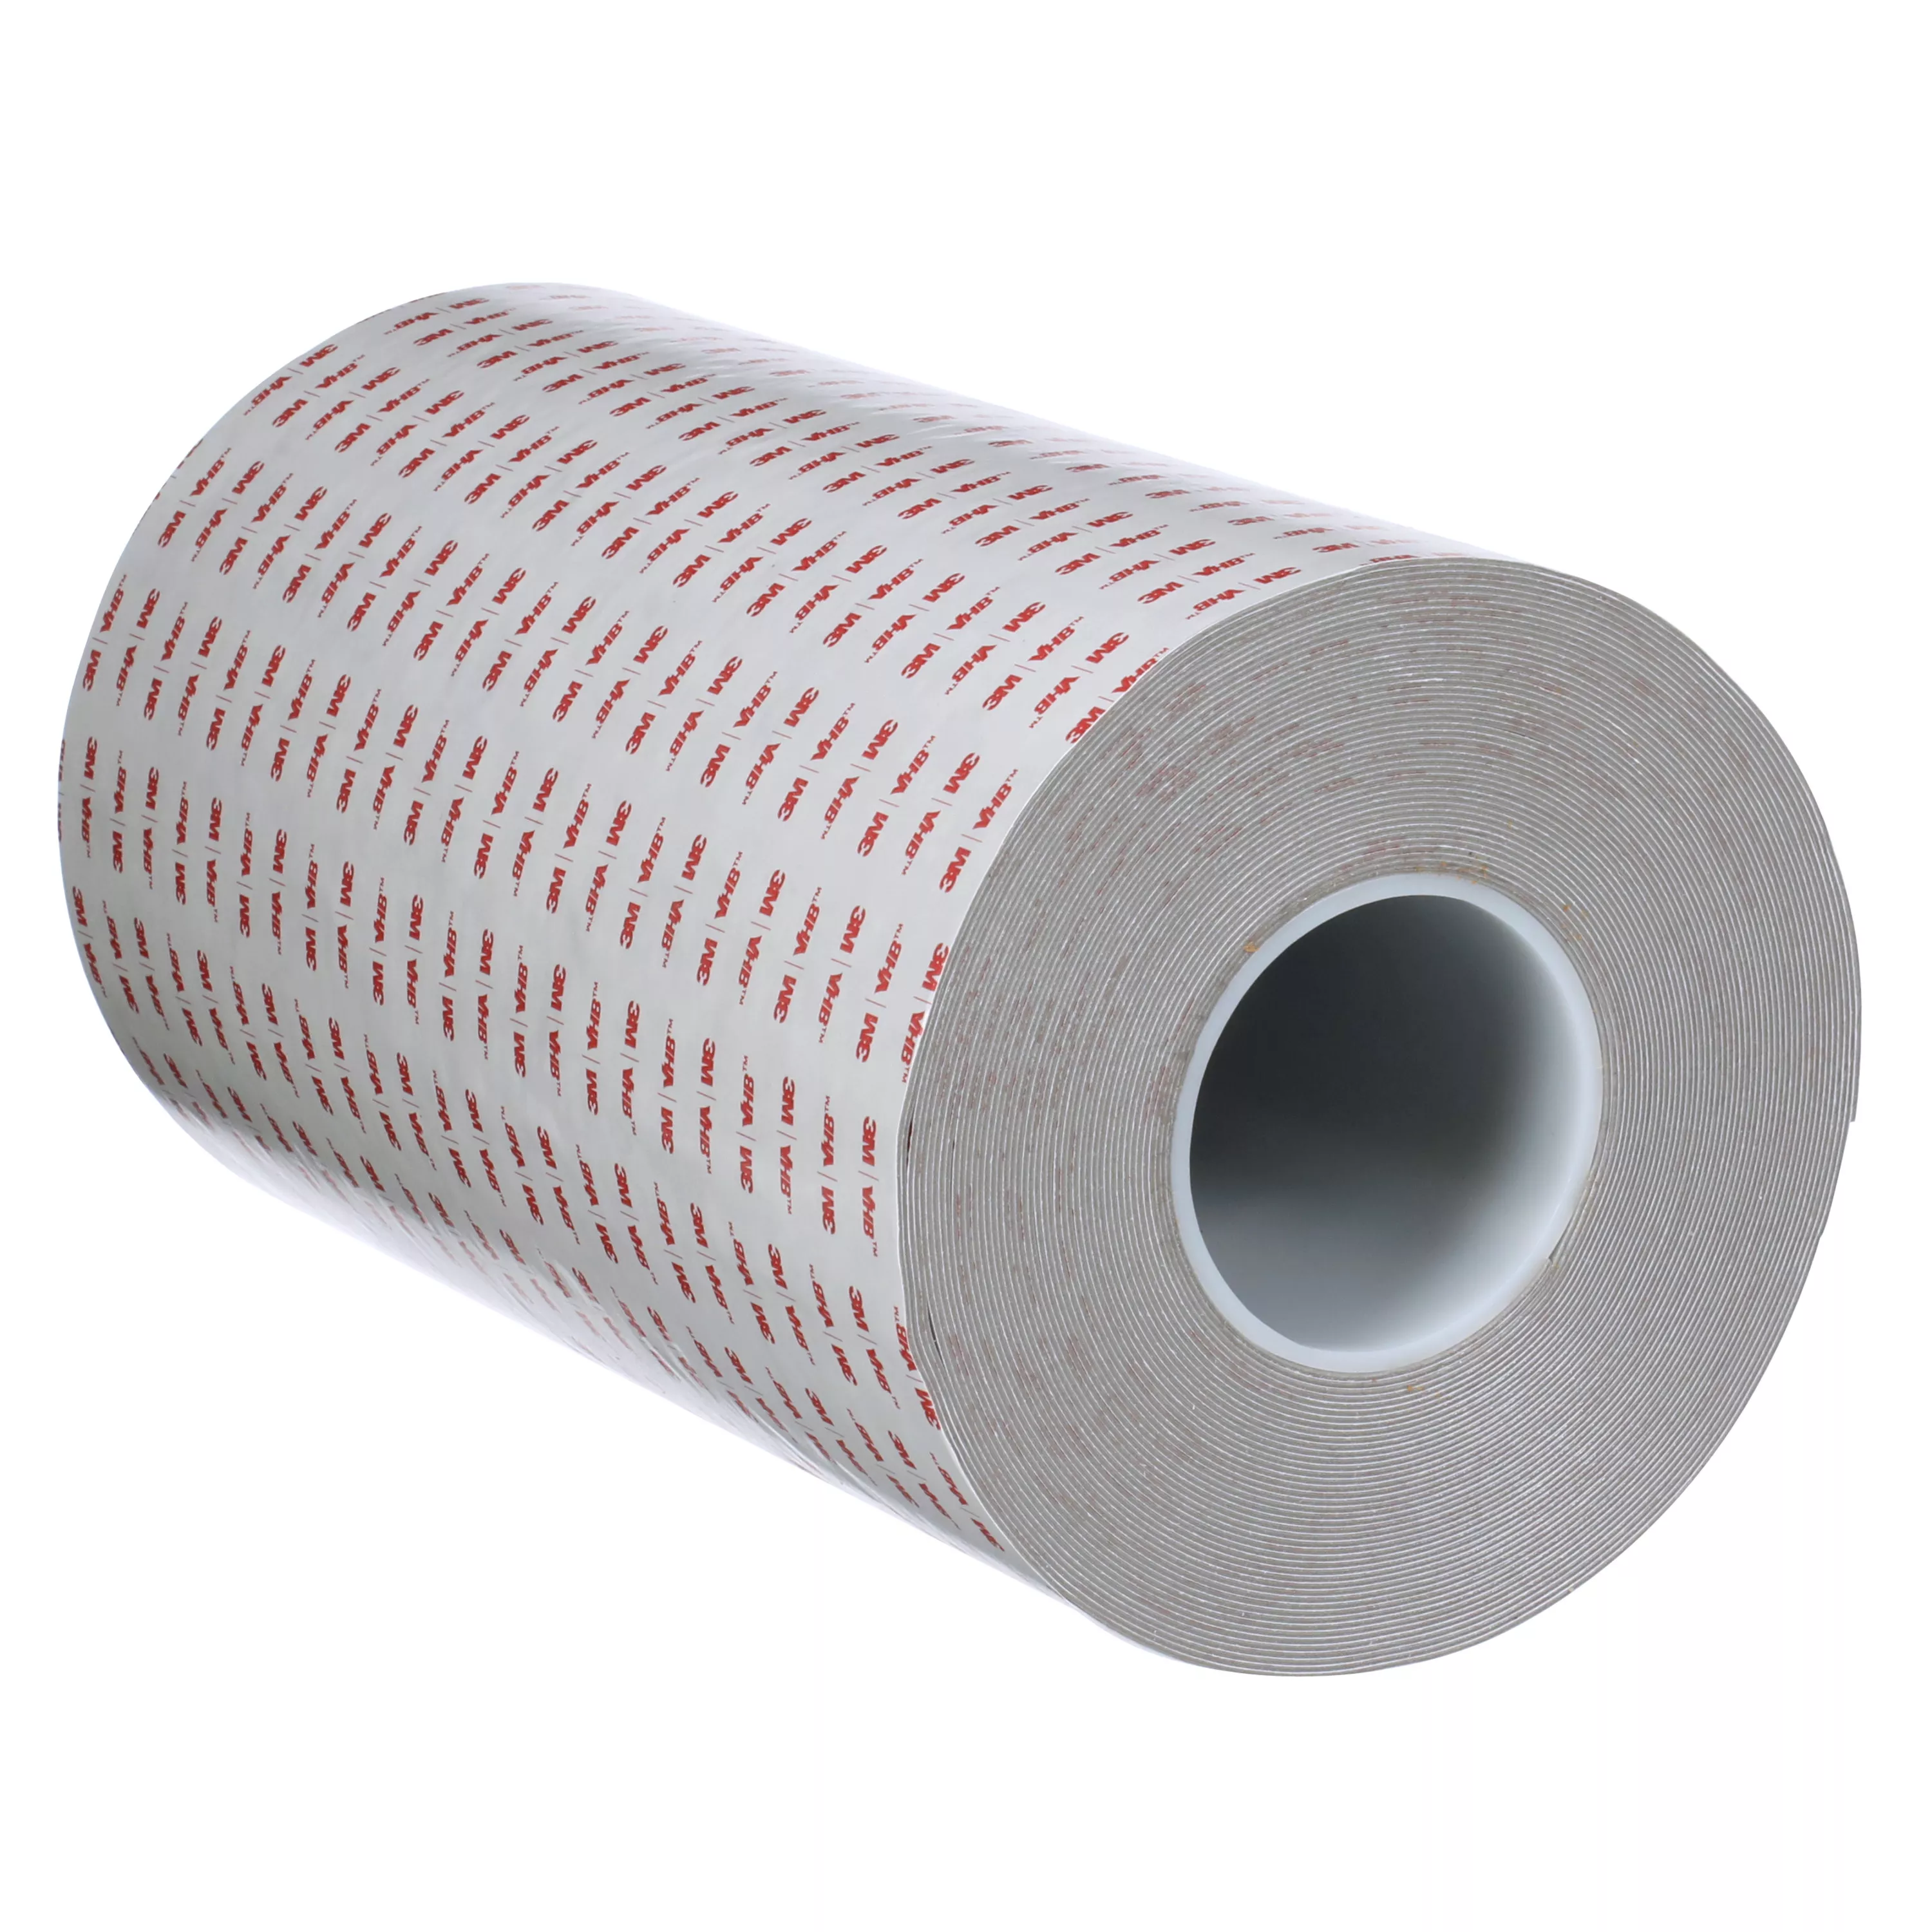 3M™ VHB™ Tape RP+160GP, Gray, 22 in x 36 yd, 62 mil, Paper Liner, 1 Roll/Case